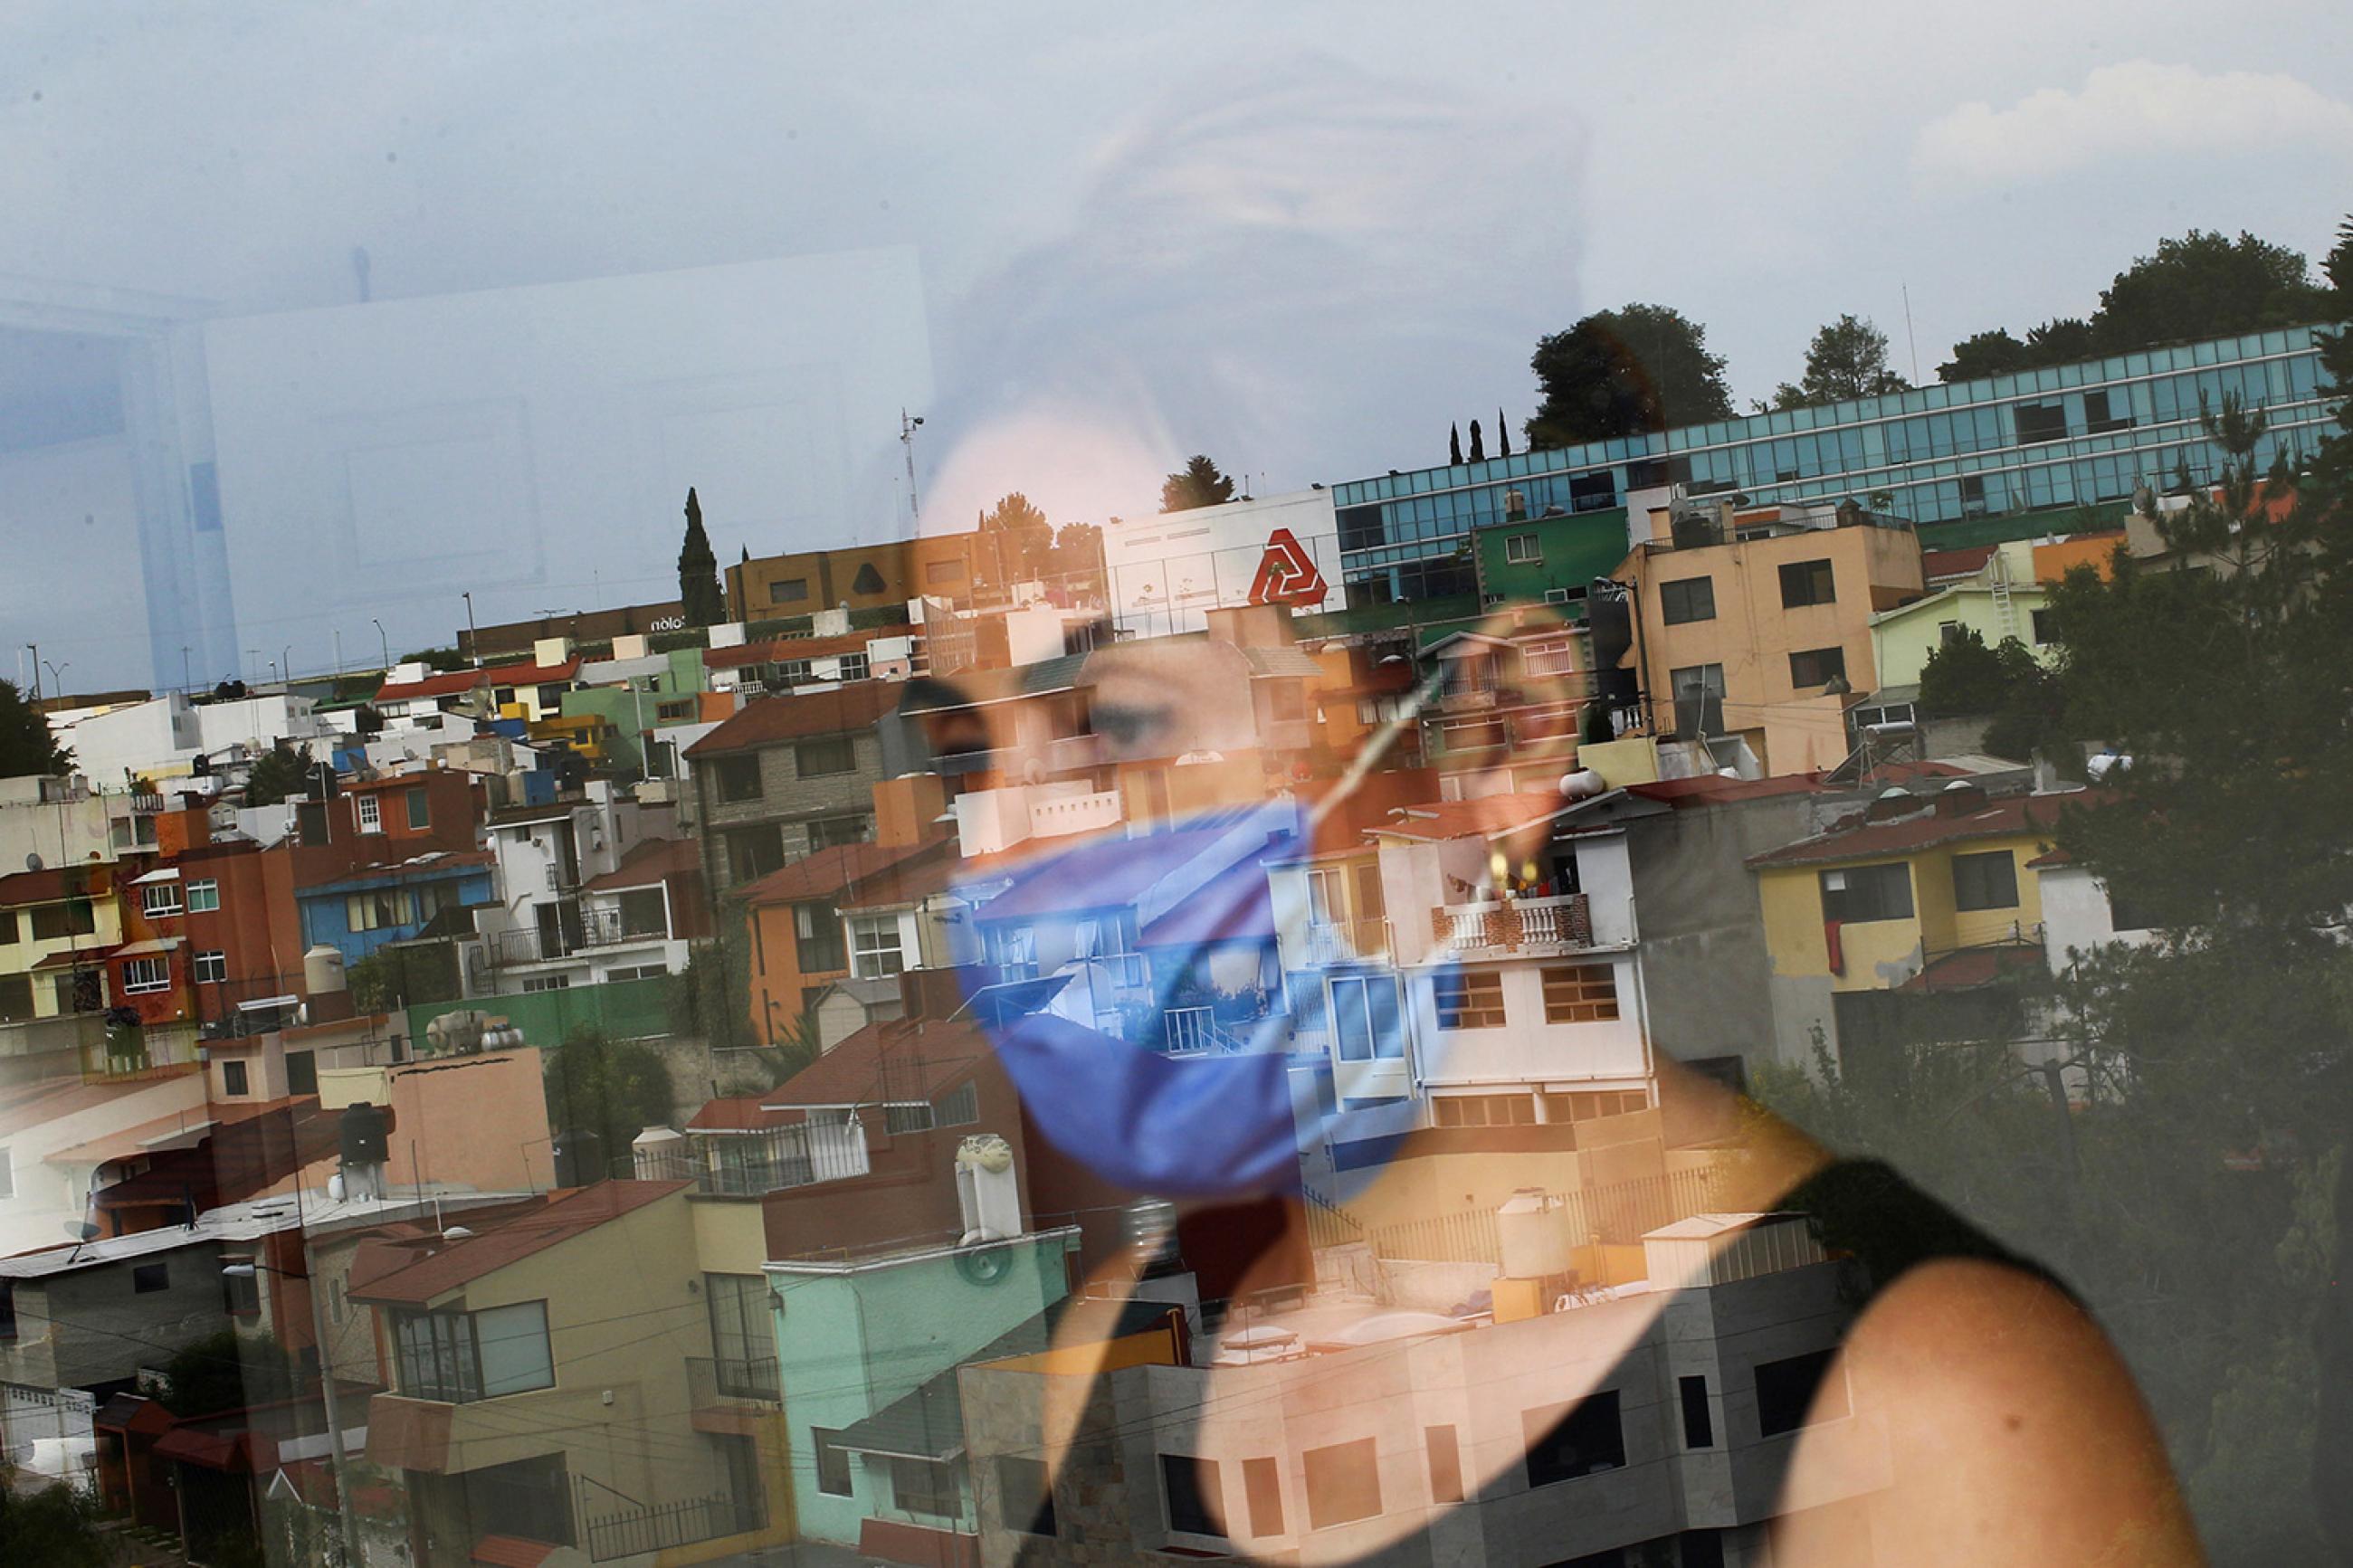 Monica Samudio, 46, whose husband Jorge Garcia, 51, died from coronavirus looks out of her window in Mexico City on April 29, 2020. Samudio faced discrimination when she contracted the disease. Picture shows the woman looking out her window and partially reflected in the glass. REUTERS/Edgard Garrido